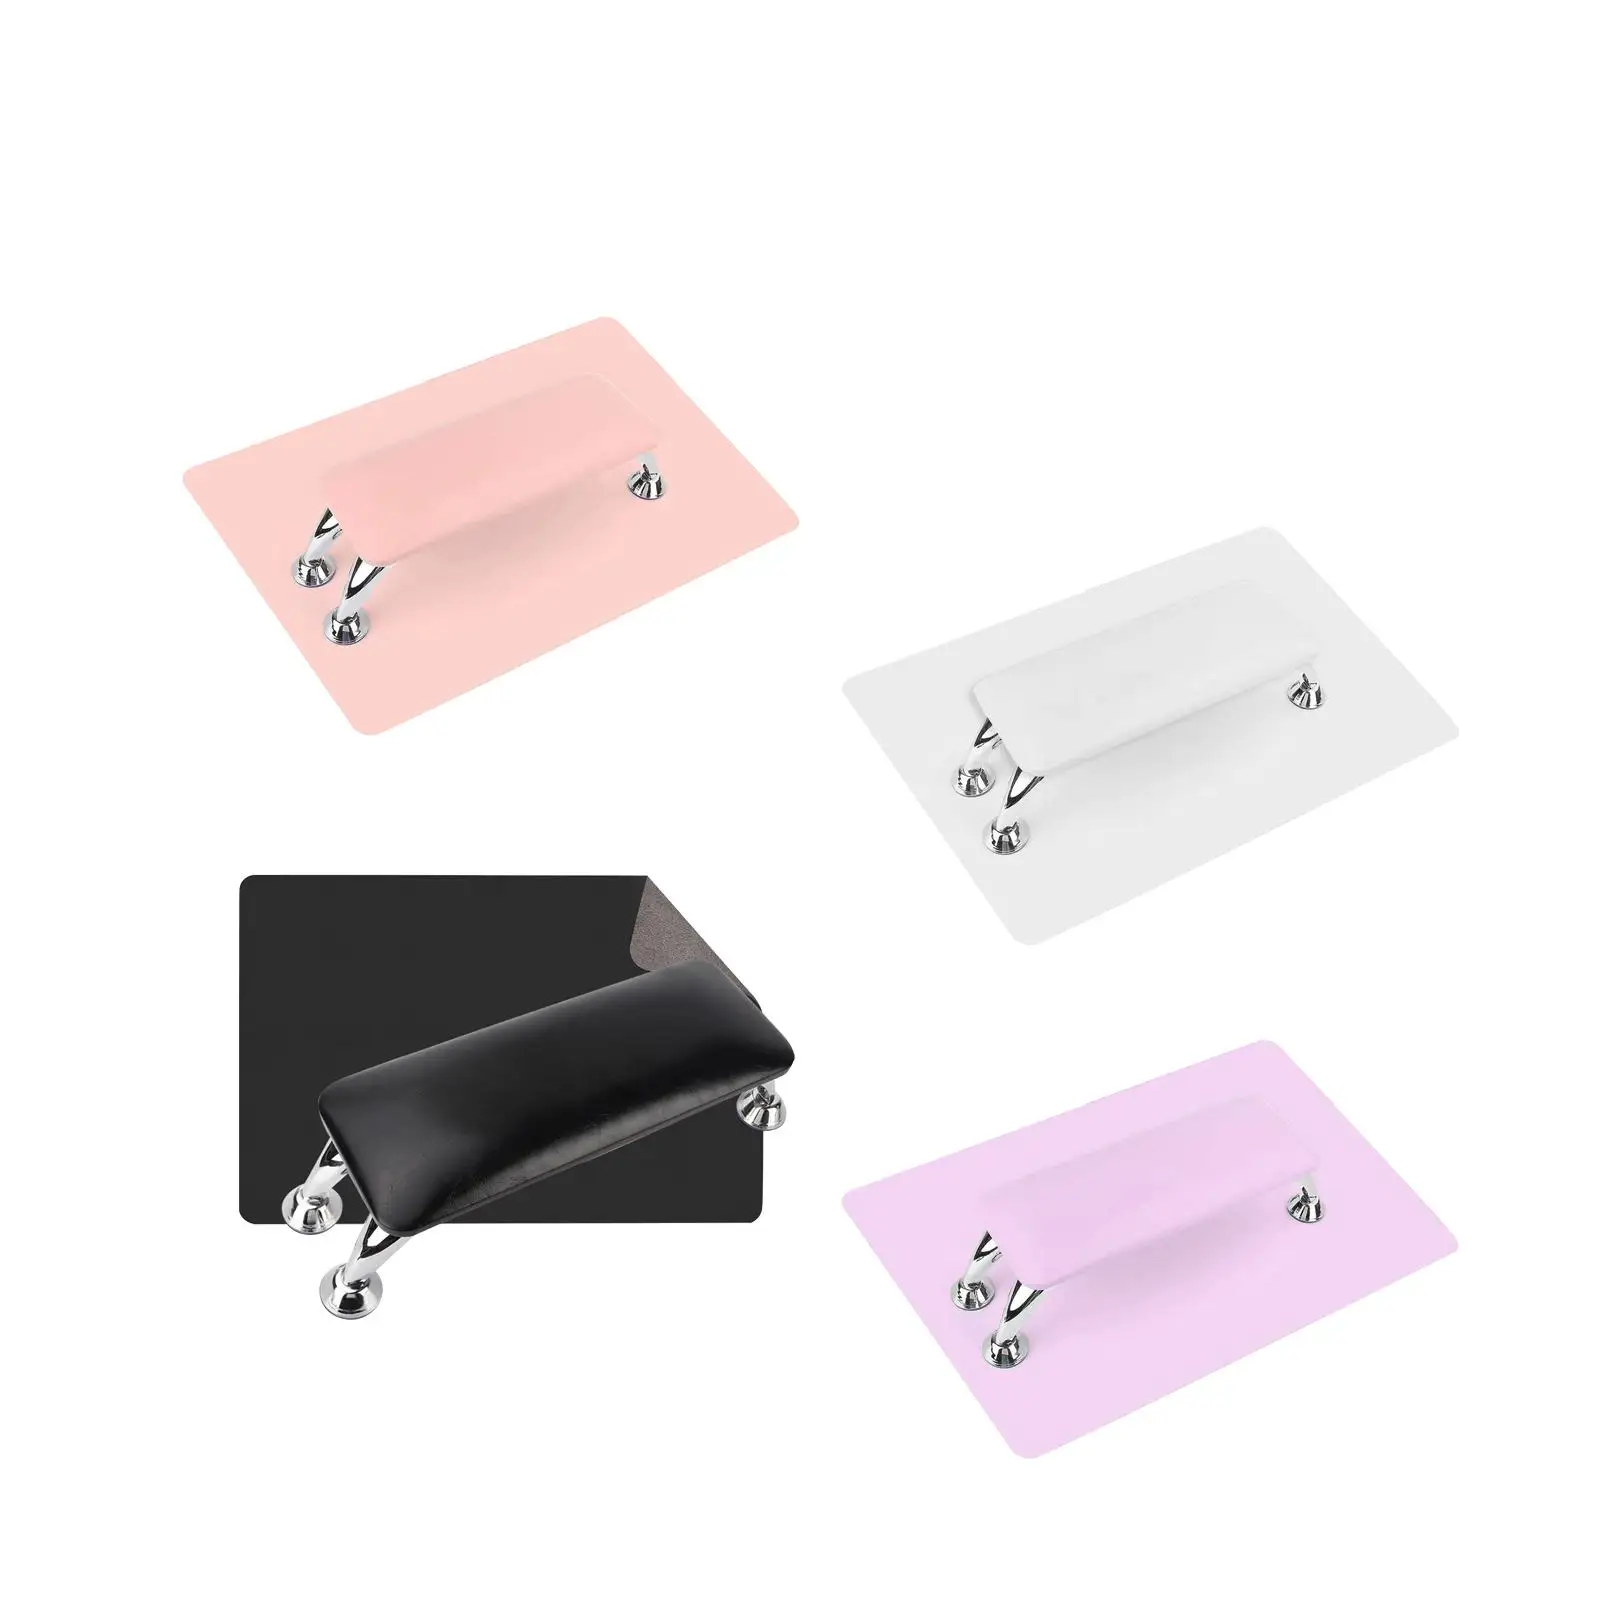 Professional Nail Rest Cushion Table Desk Station with Pad PU Leather Manicure Hand Pillow for Manicure Acrylic Nails Salon Home